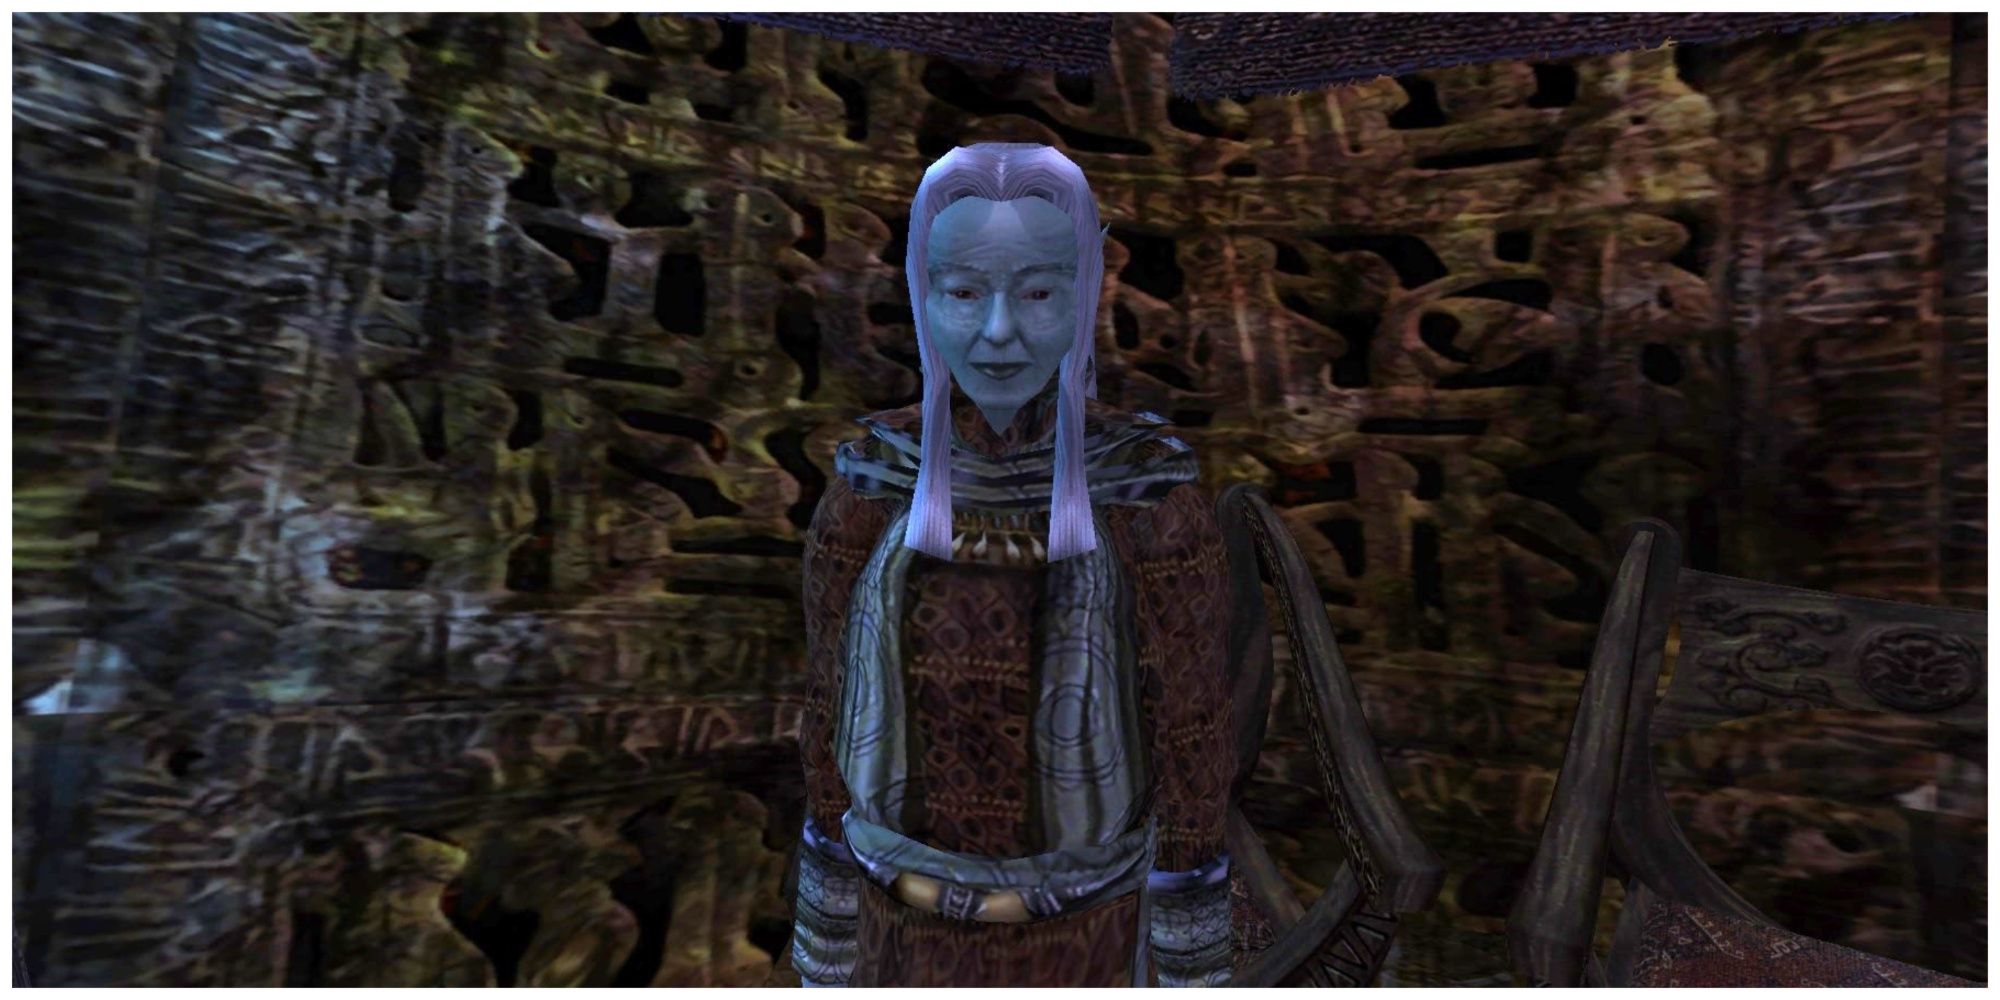 Mistress Dratha in her tower in Morrowind